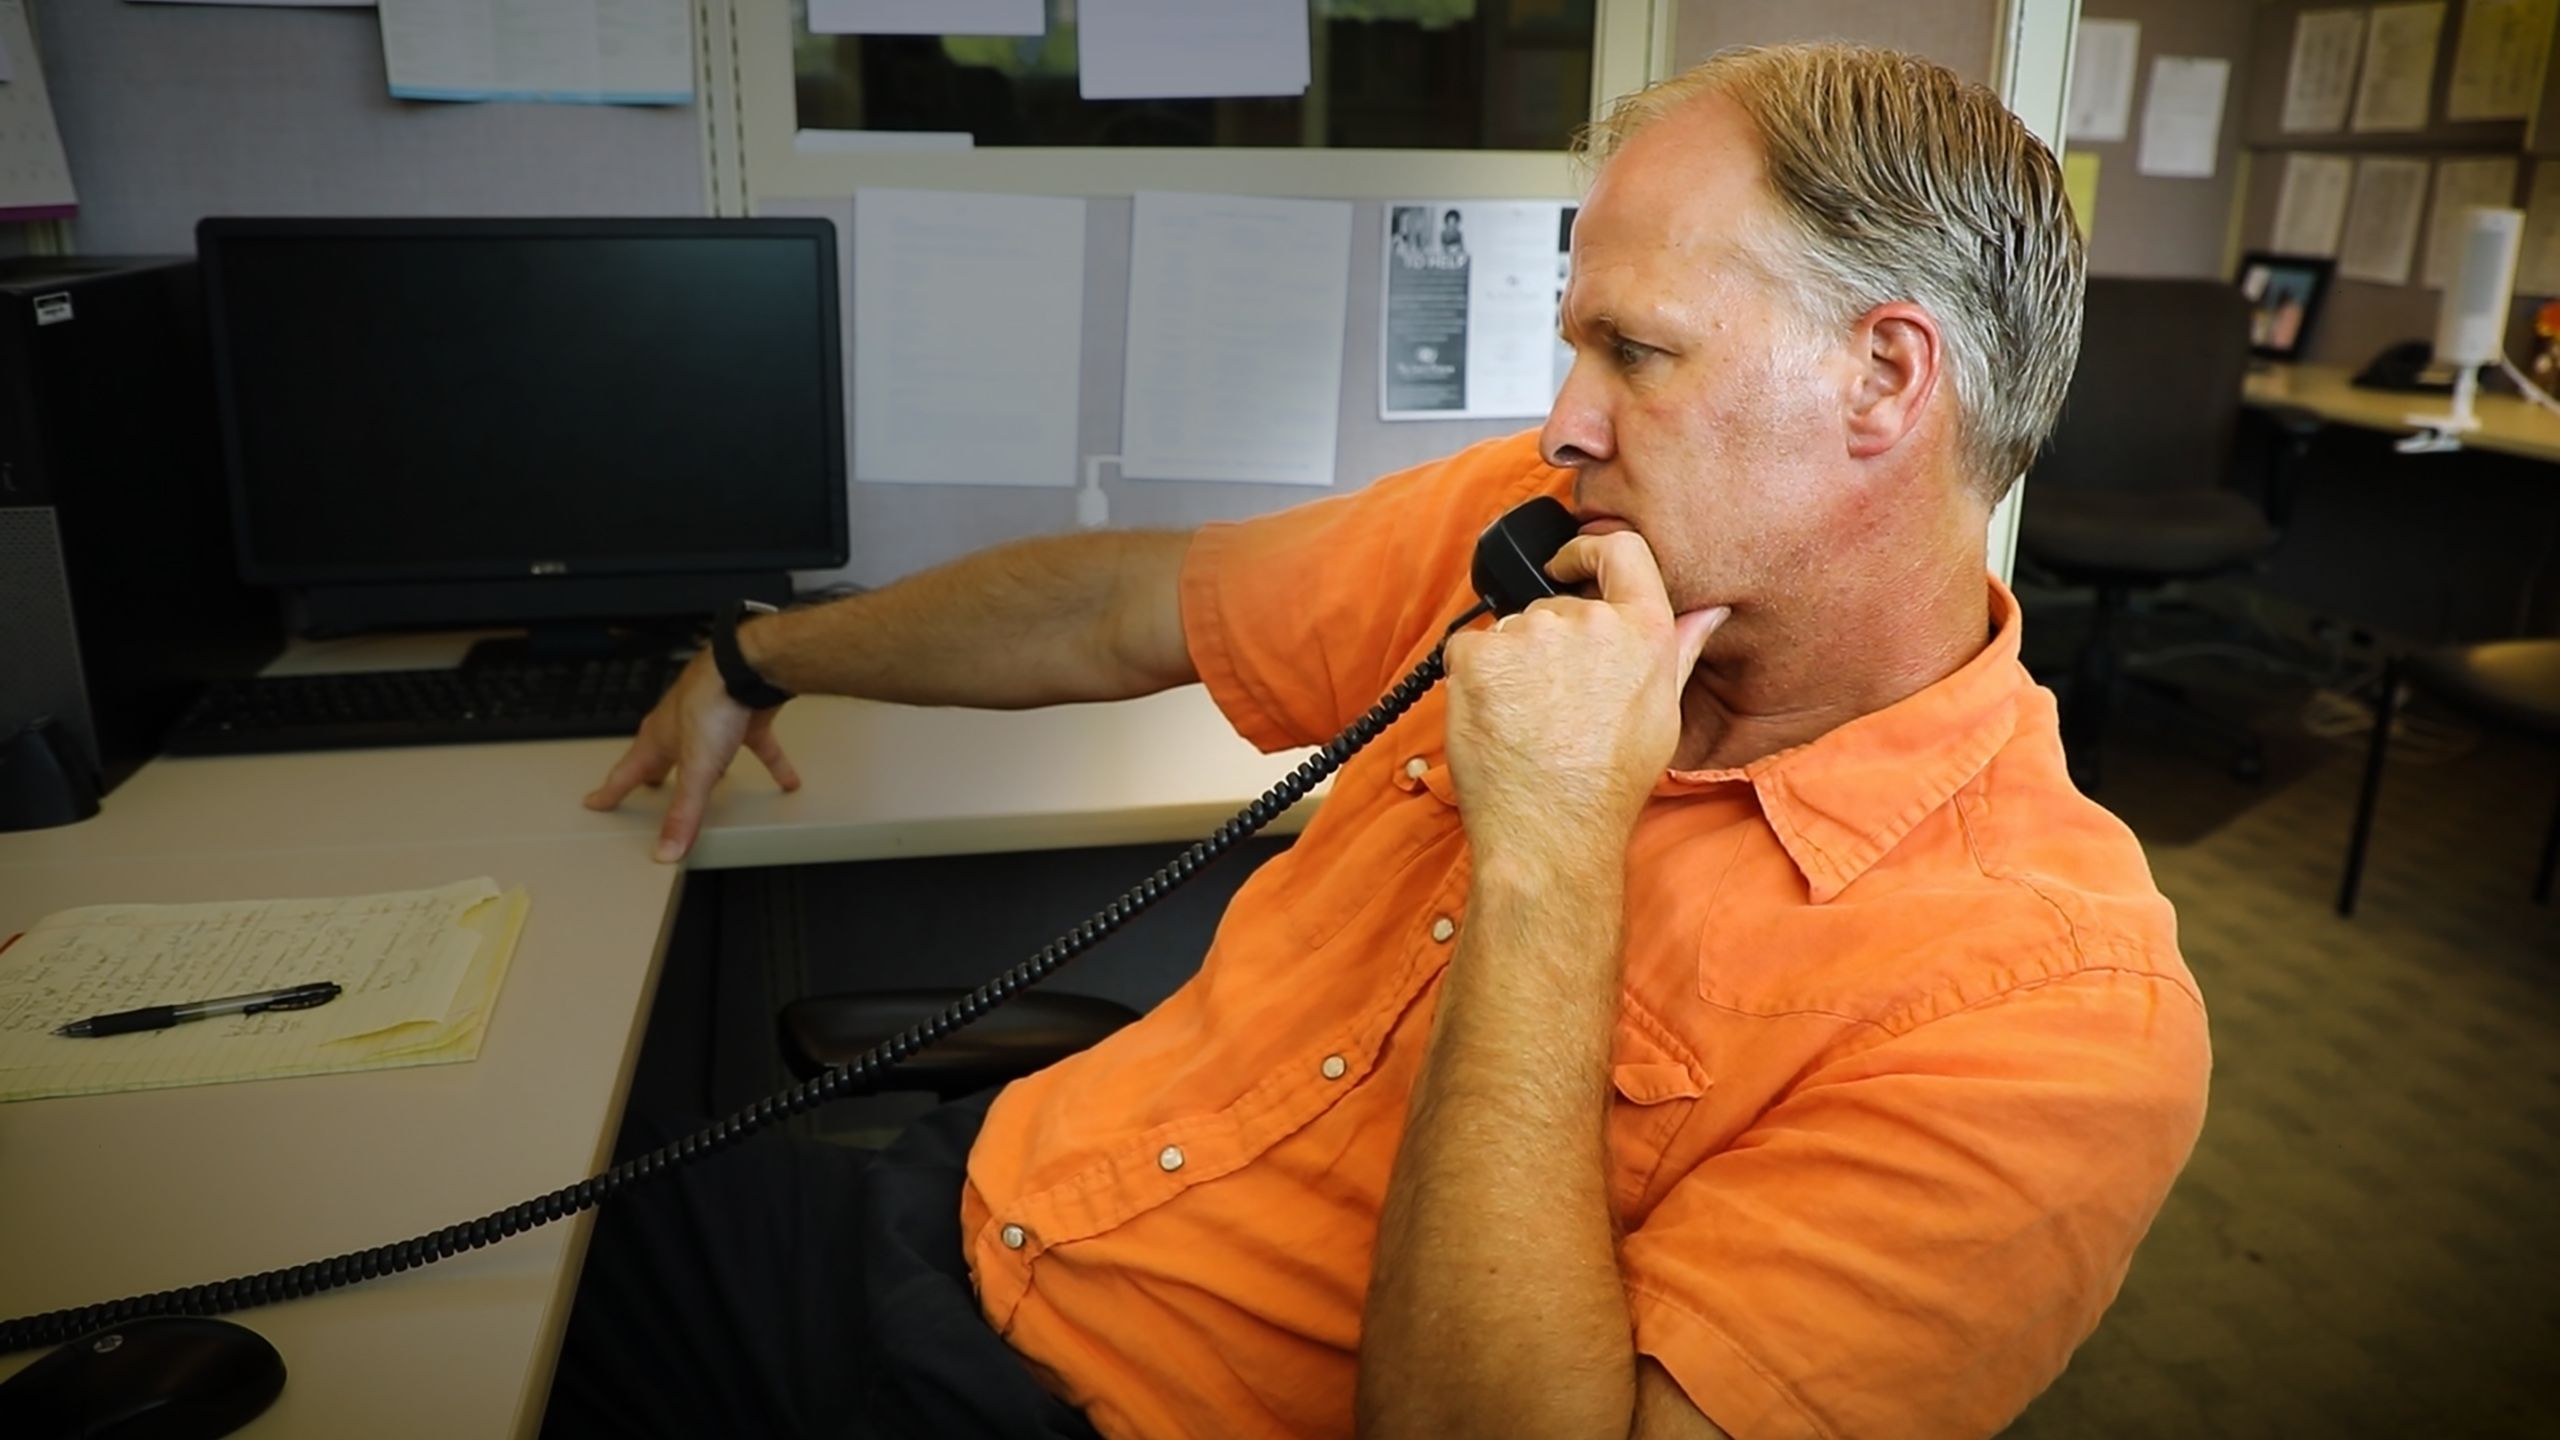 Crisis Intervention Specialist John Rudolph answers a call for Frontline Service's crisis hotline.